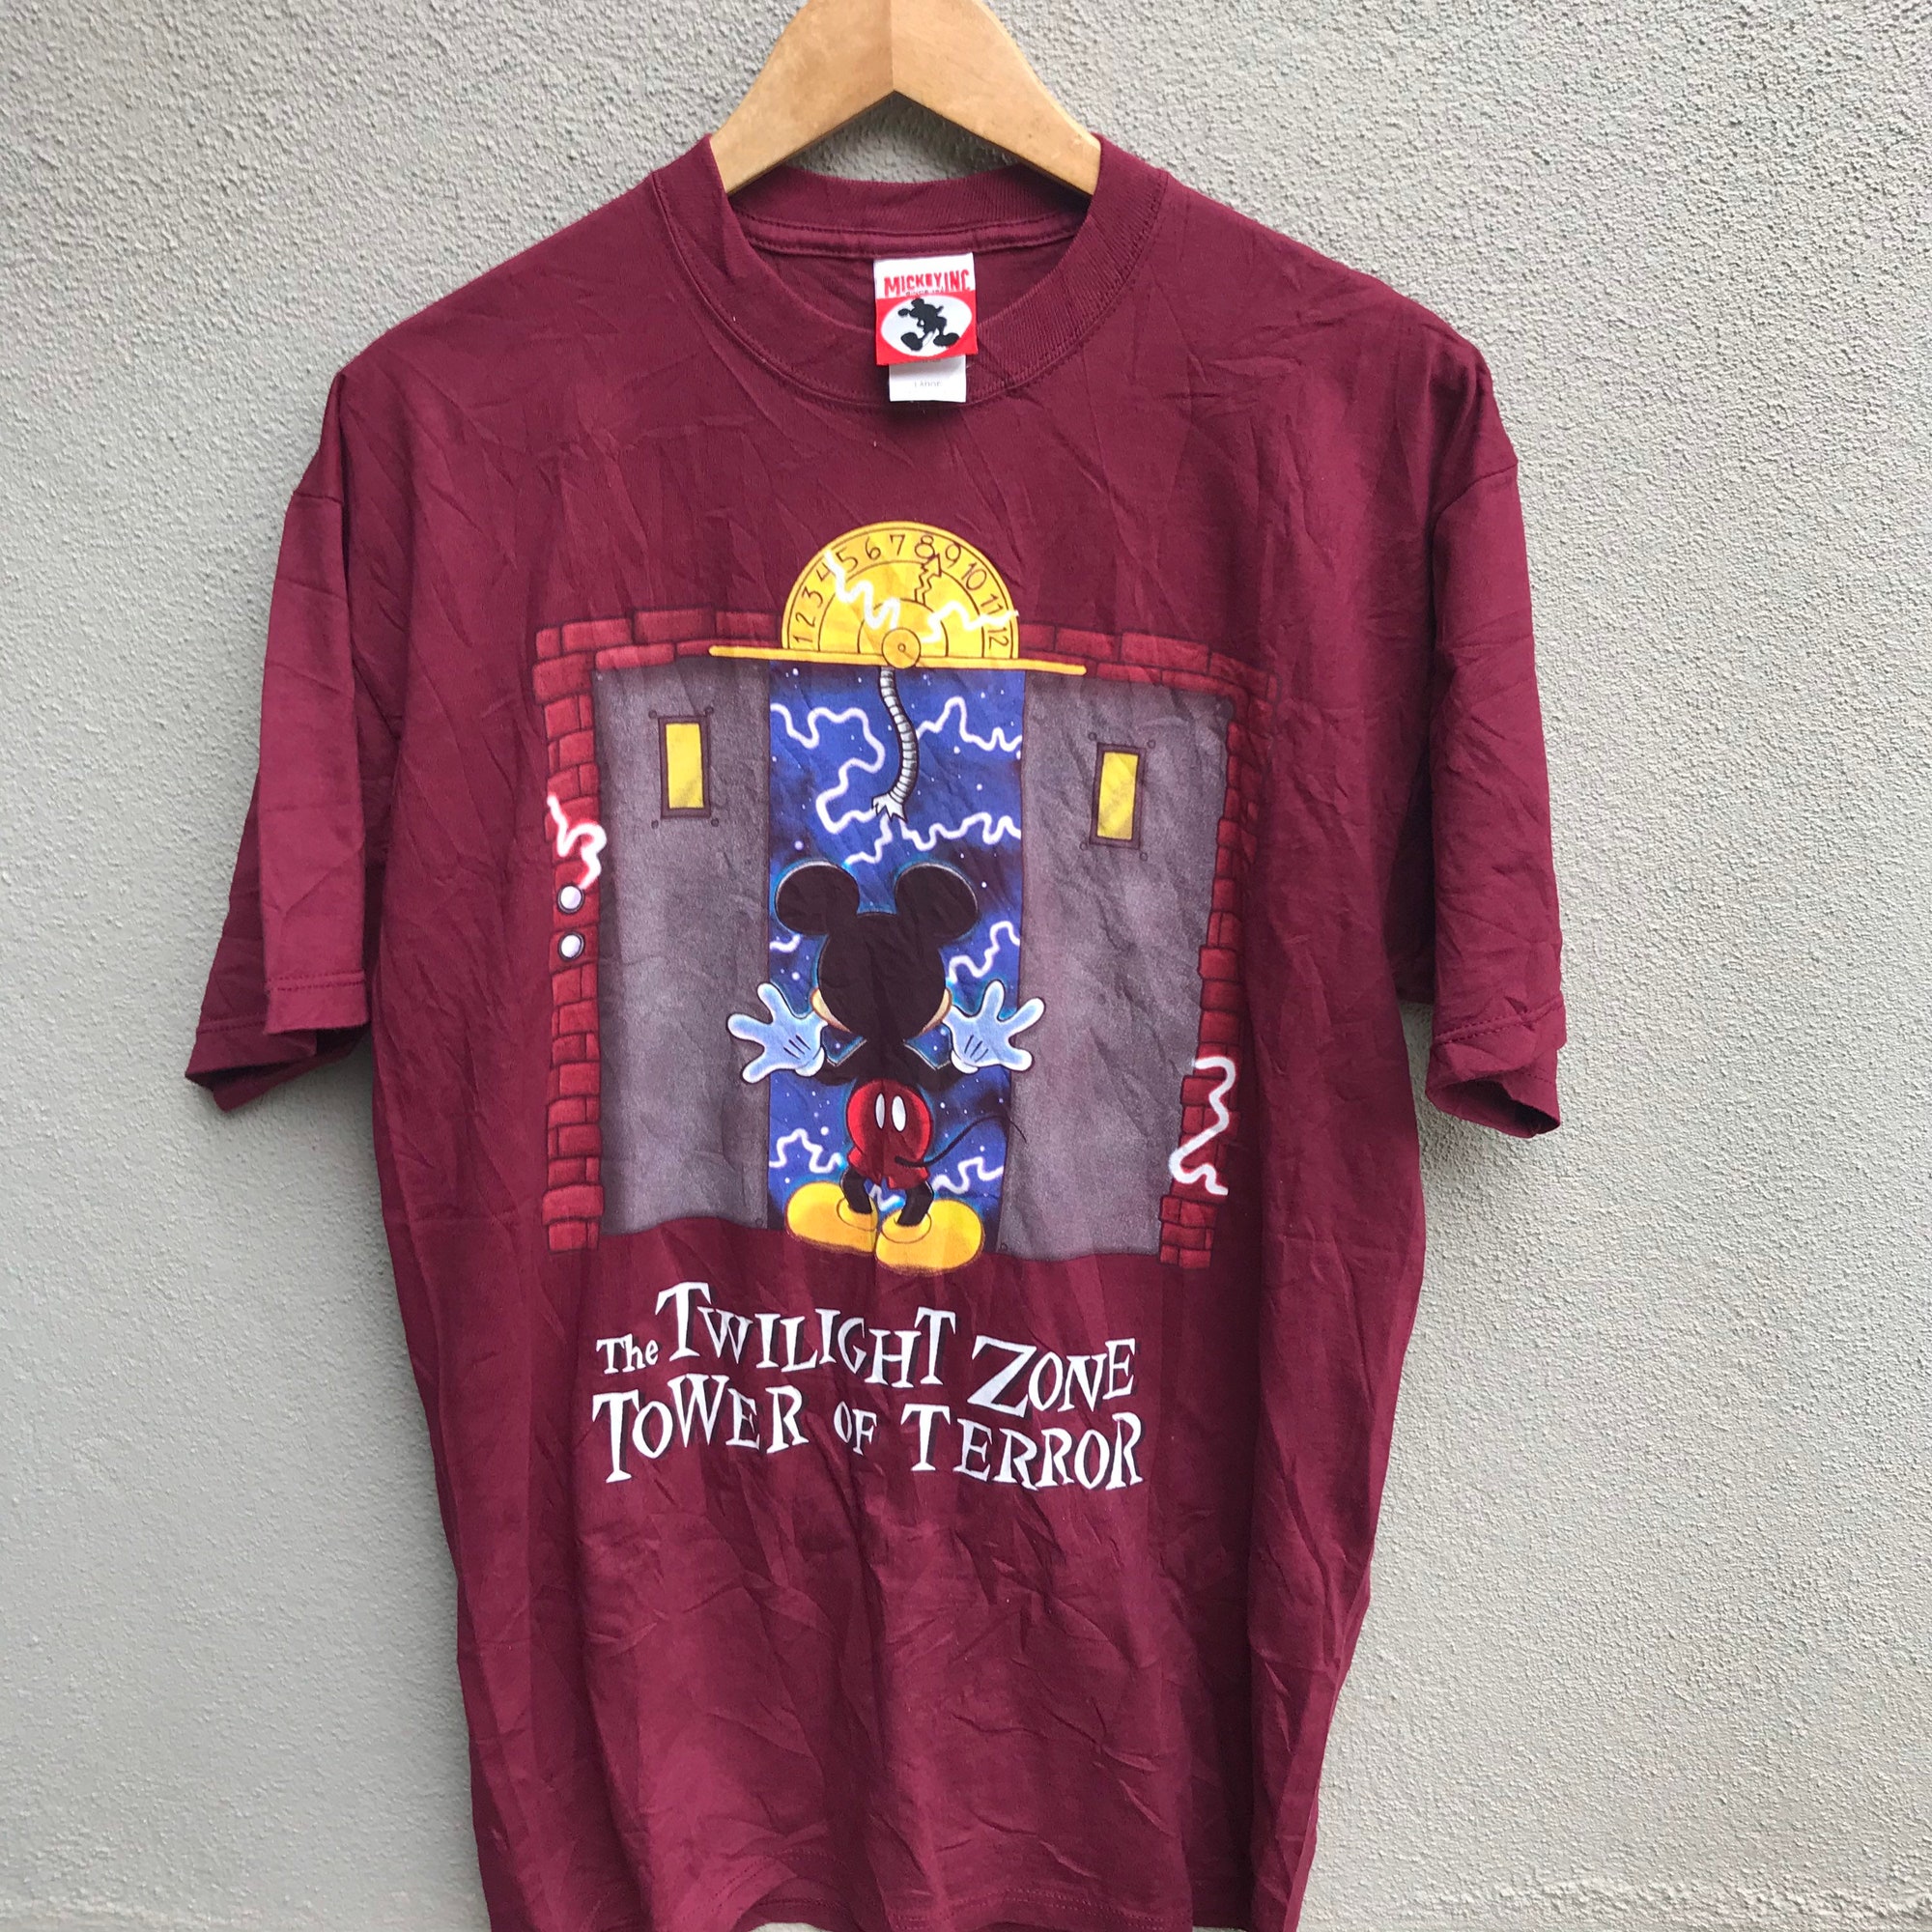 Vintage rare 90s MICKEY MOUSE the twilight zone tower of terror horror tee